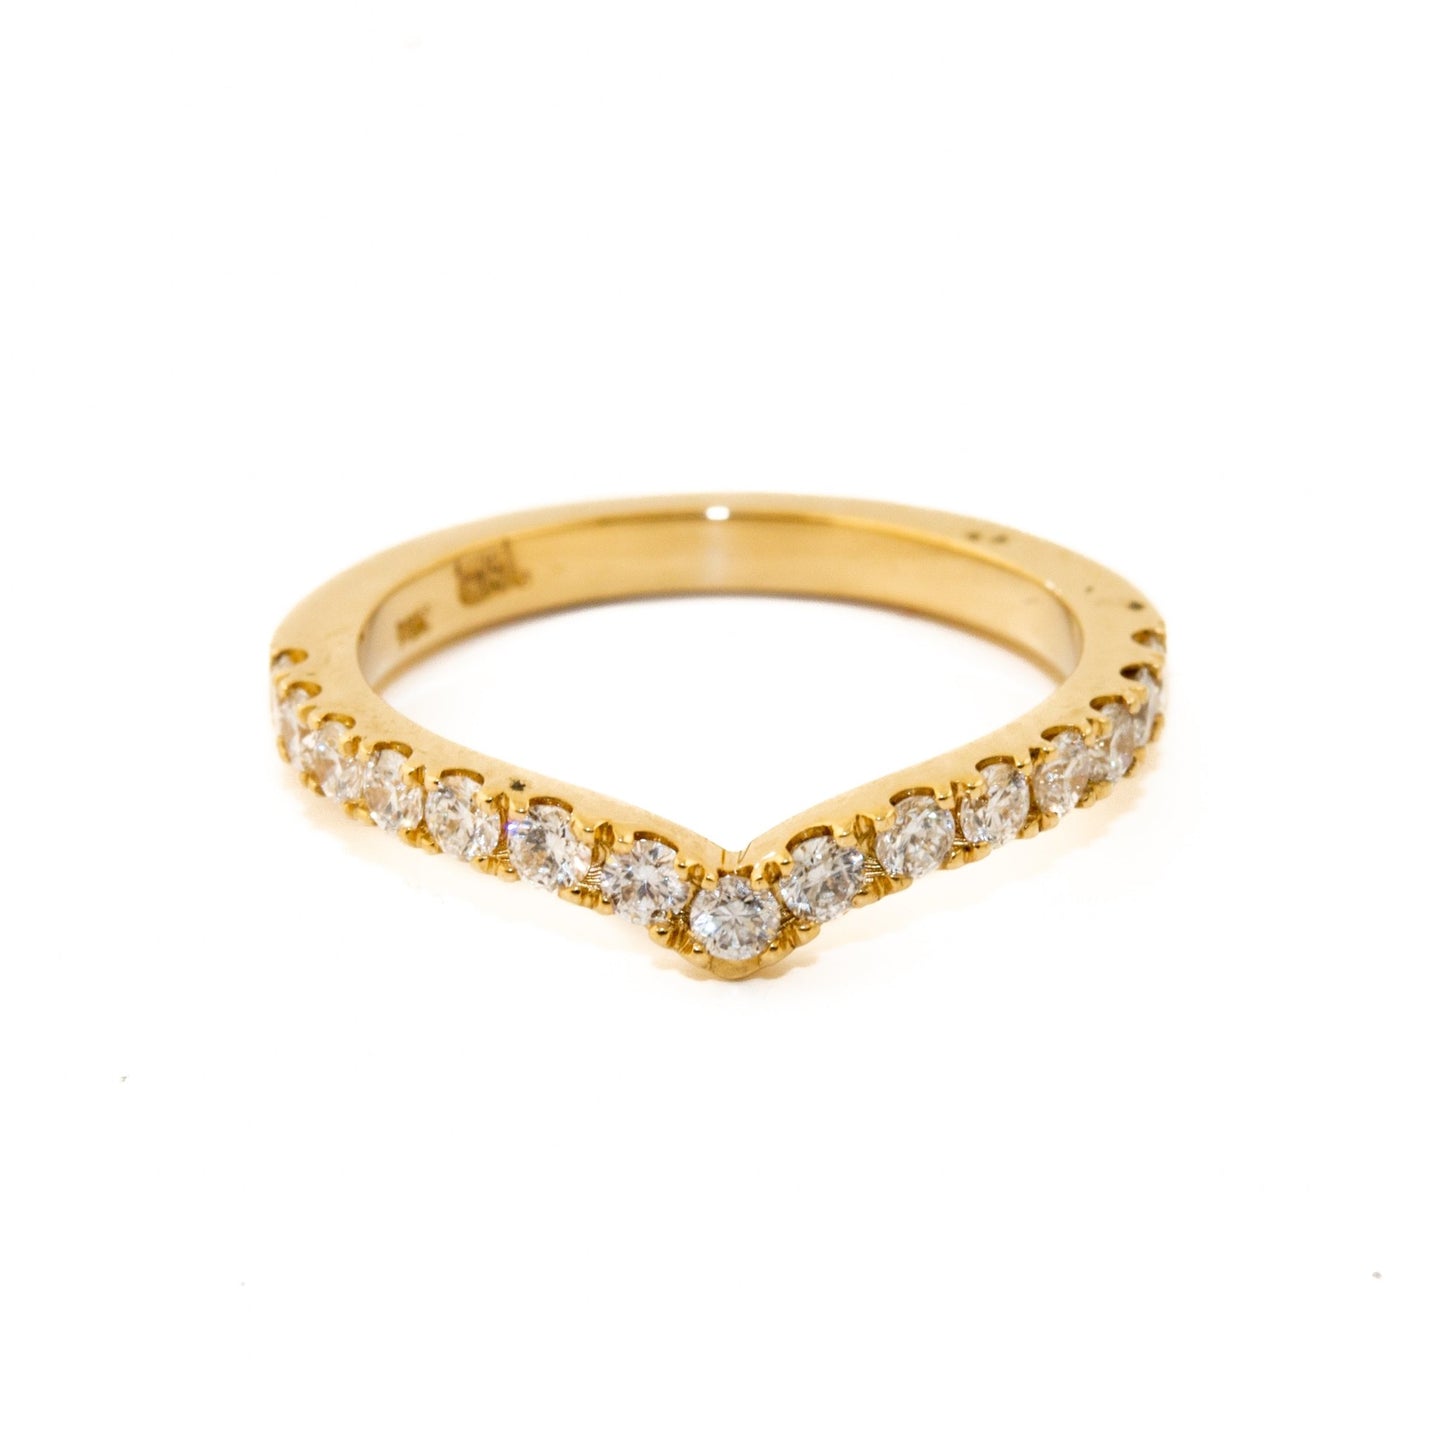 Load image into Gallery viewer, 14 KT Gold x Pave Diamond Tiara Band - Kingdom Jewelry
